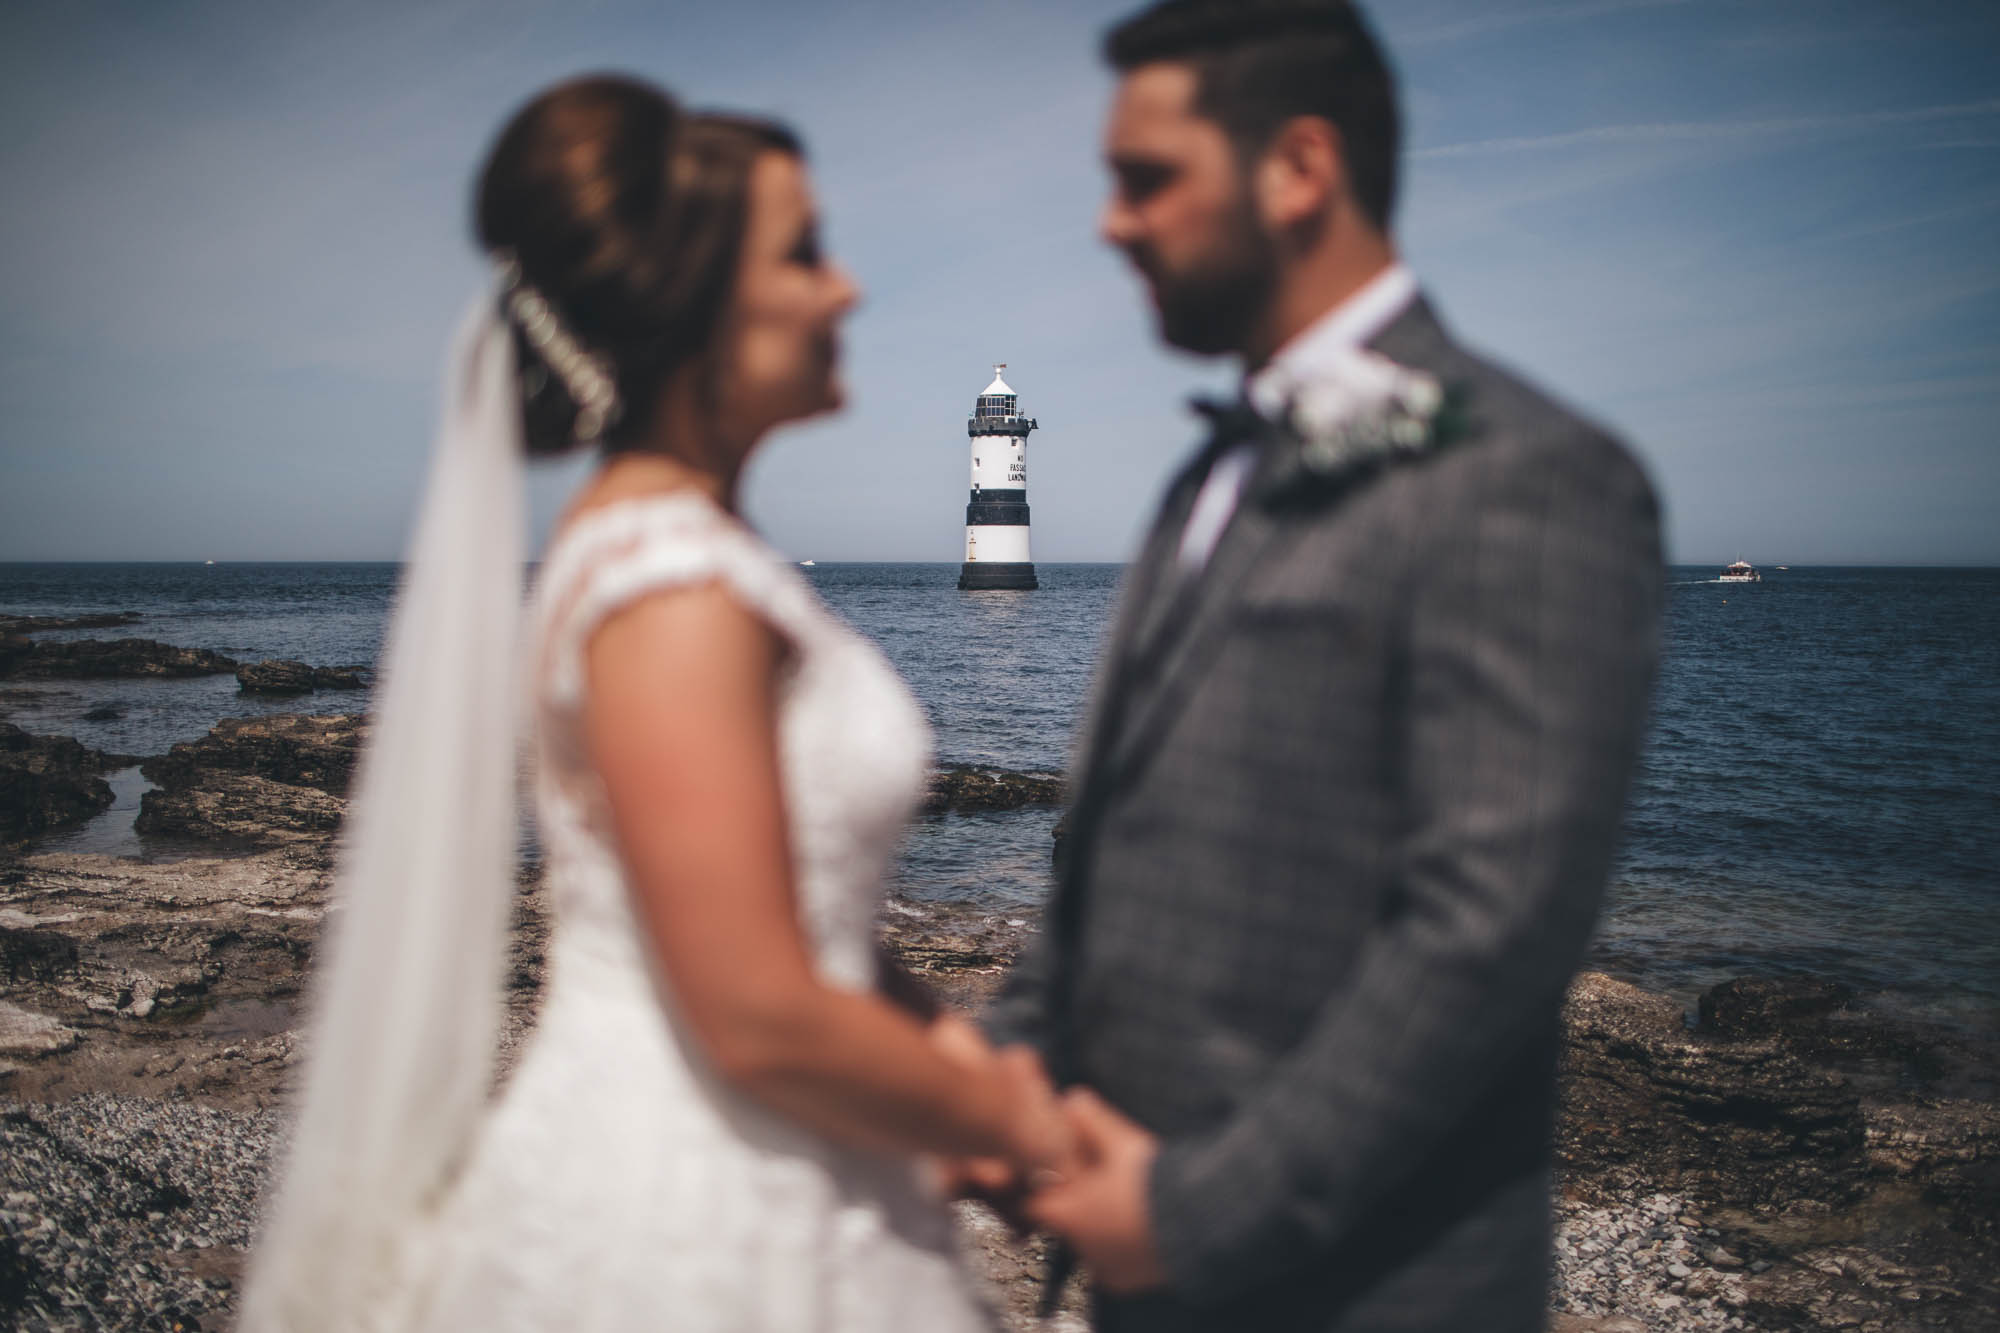 Bride and Groom are out of focus in the foreground looking lovingly at one another to draw attention to the lighthouse and coastline in the background